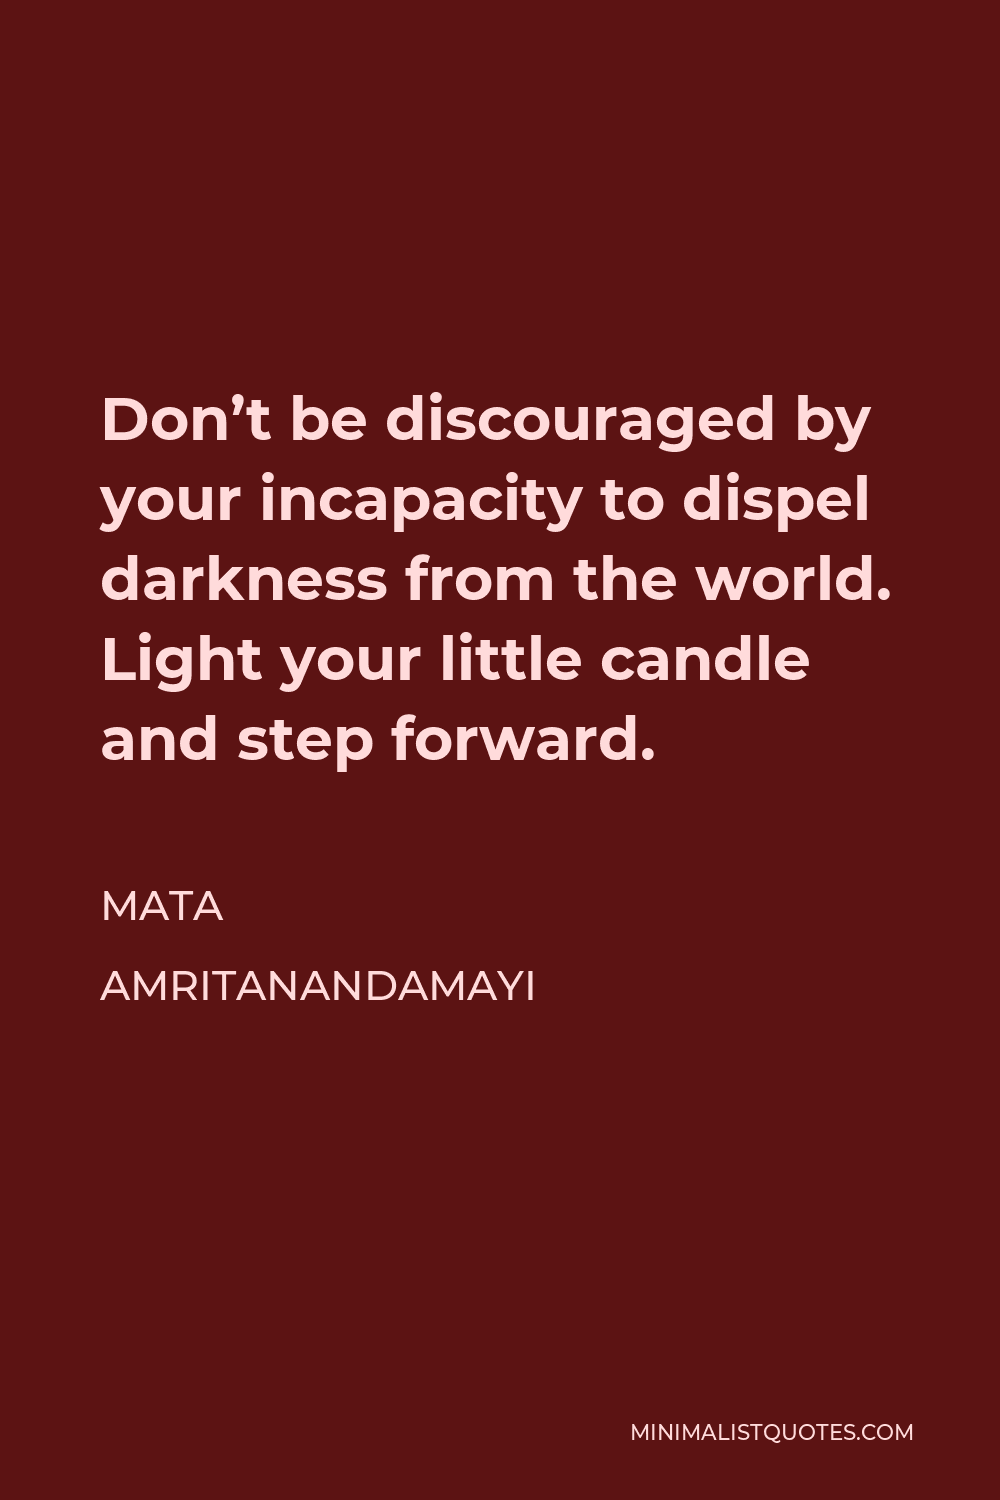 Mata Amritanandamayi Quote - Don’t be discouraged by your incapacity to dispel darkness from the world. Light your little candle and step forward.